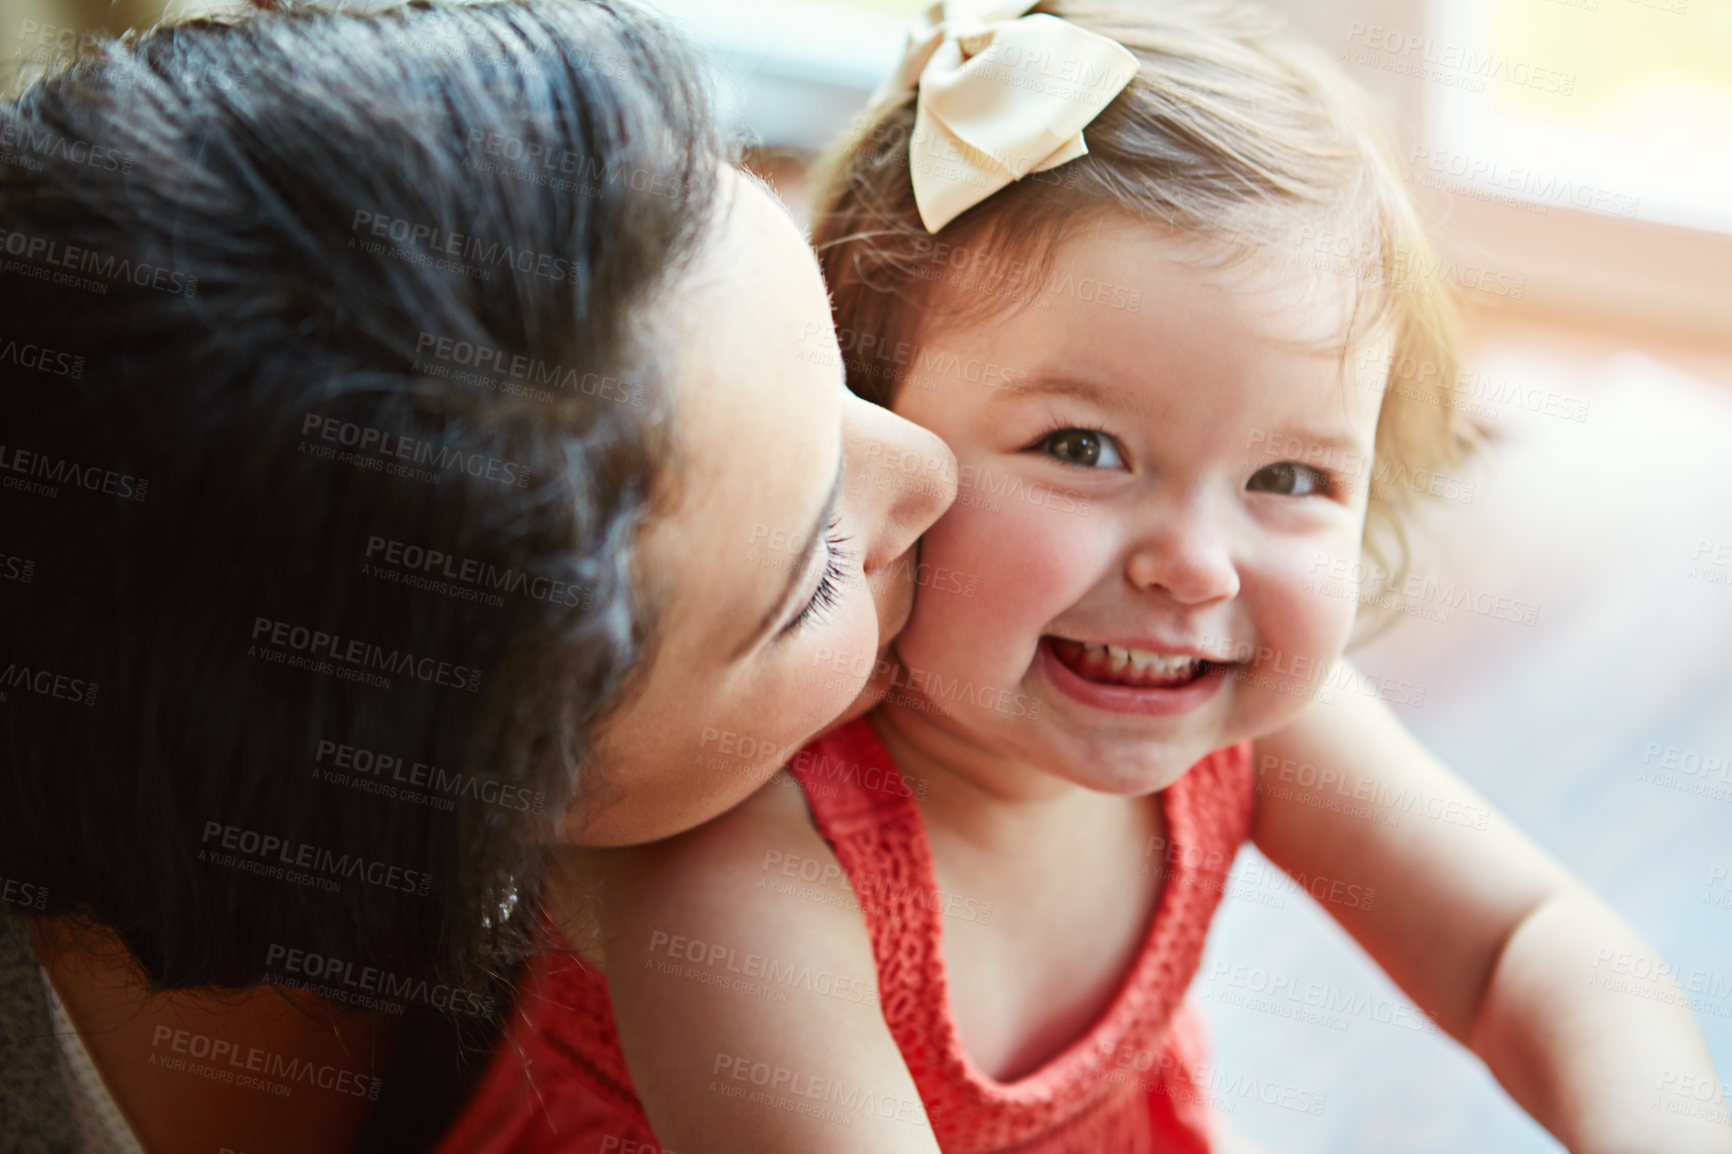 Buy stock photo Portrait of a baby with her mother kissing her cheek while playing, bonding and spending time together. Happy, smile and girl infant child sitting with her mom in their modern family home with love.